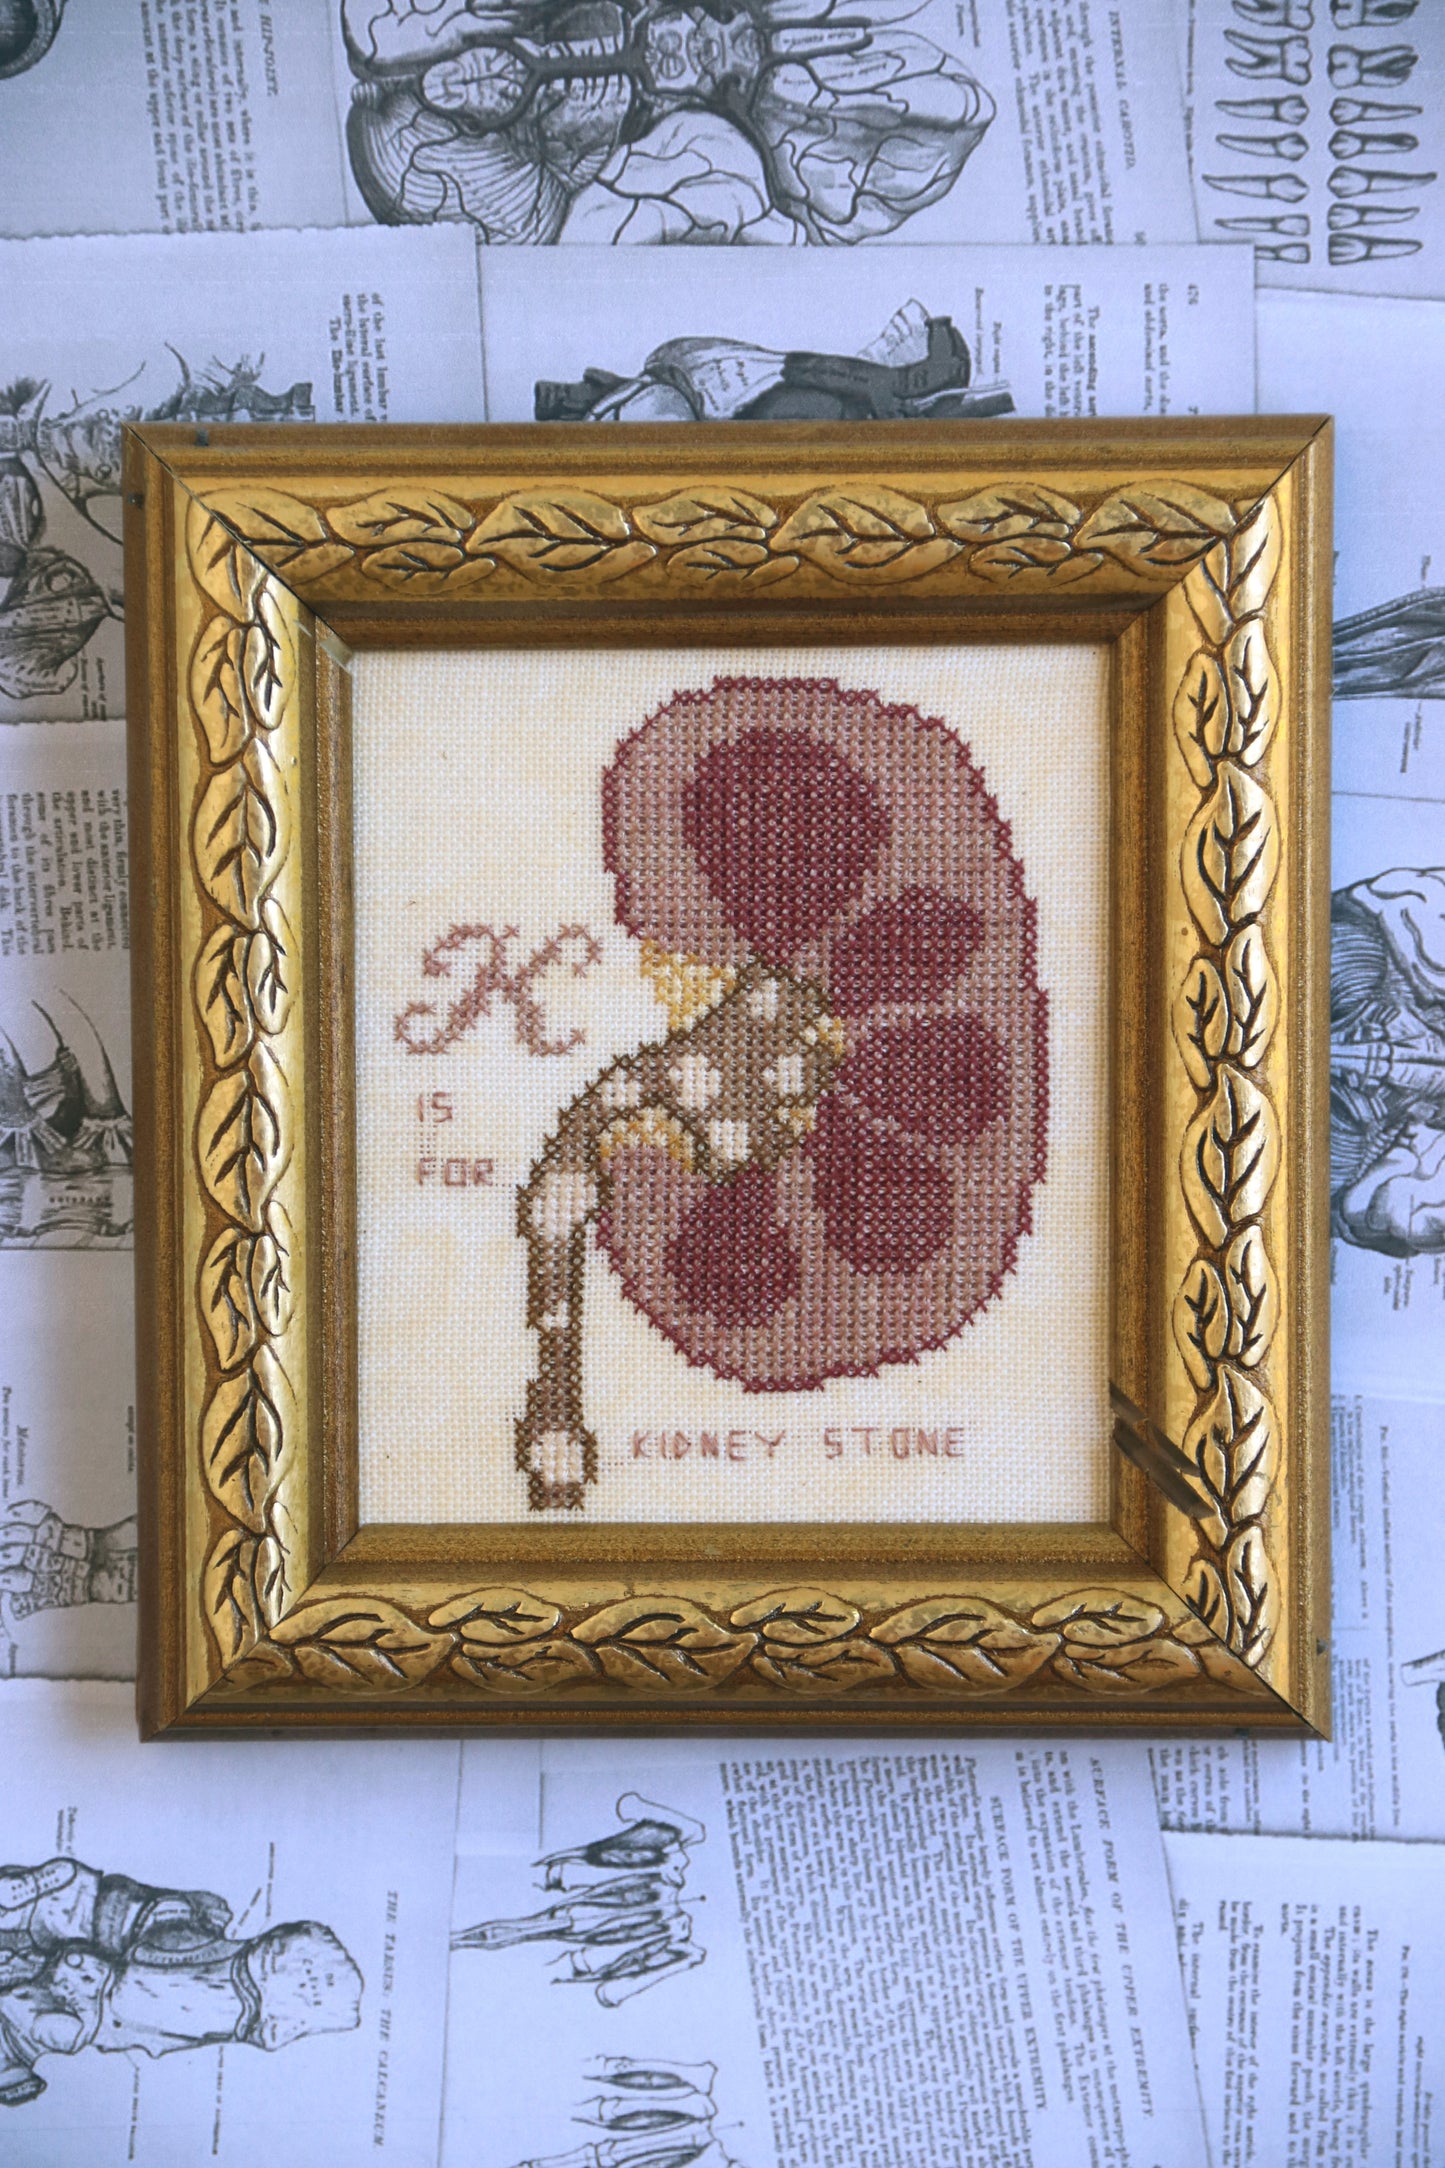 K is for Kidney Stone by Heartstring Samplery PDF Cross Stitch Chart 100% CHARITY